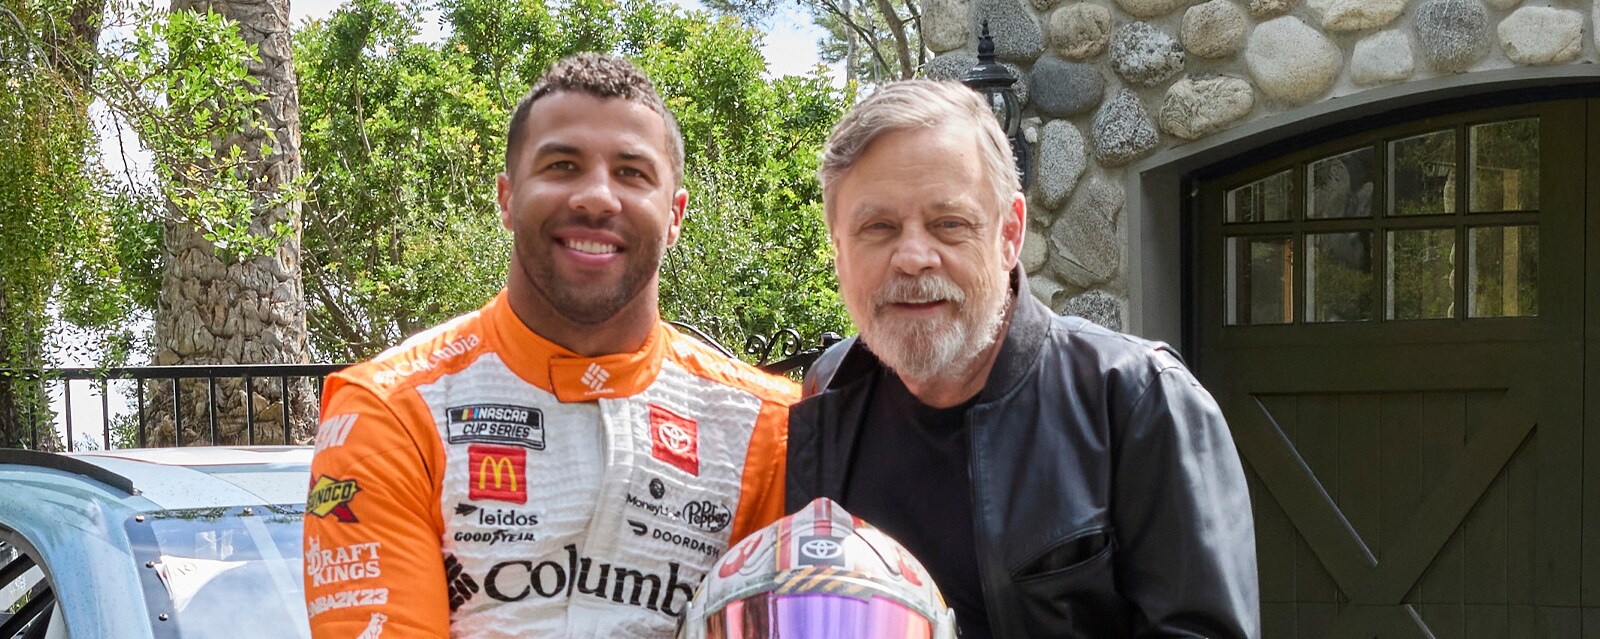 Columbia and NASCAR Team Up for Star Wars-Themed Car Wrap 